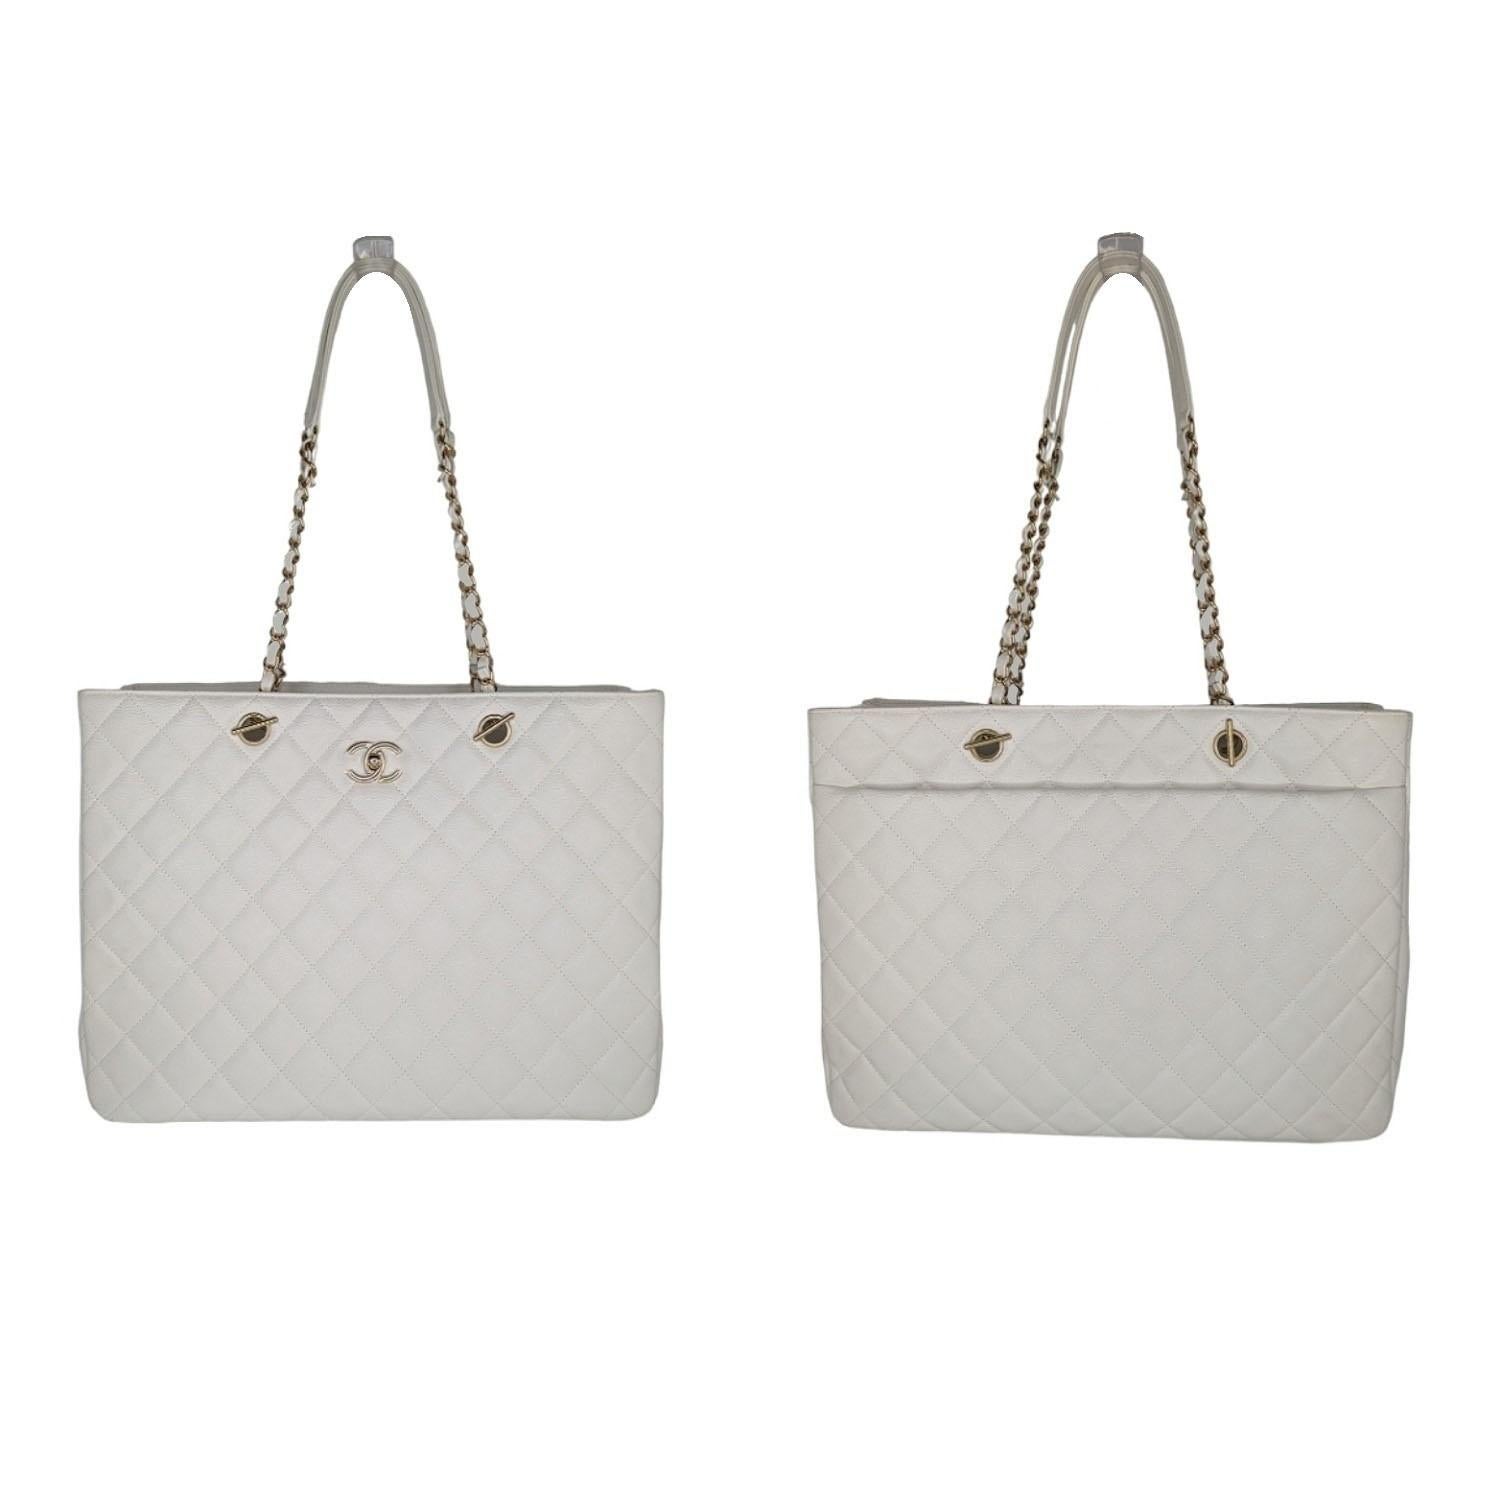 This large classic tote is crafted of diamond quilted caviar leather in white. It features polished gold chain link leather threaded shoulder straps, a polished gold Chanel CC turn lock on the front and a spacious back pocket. The top opens to a